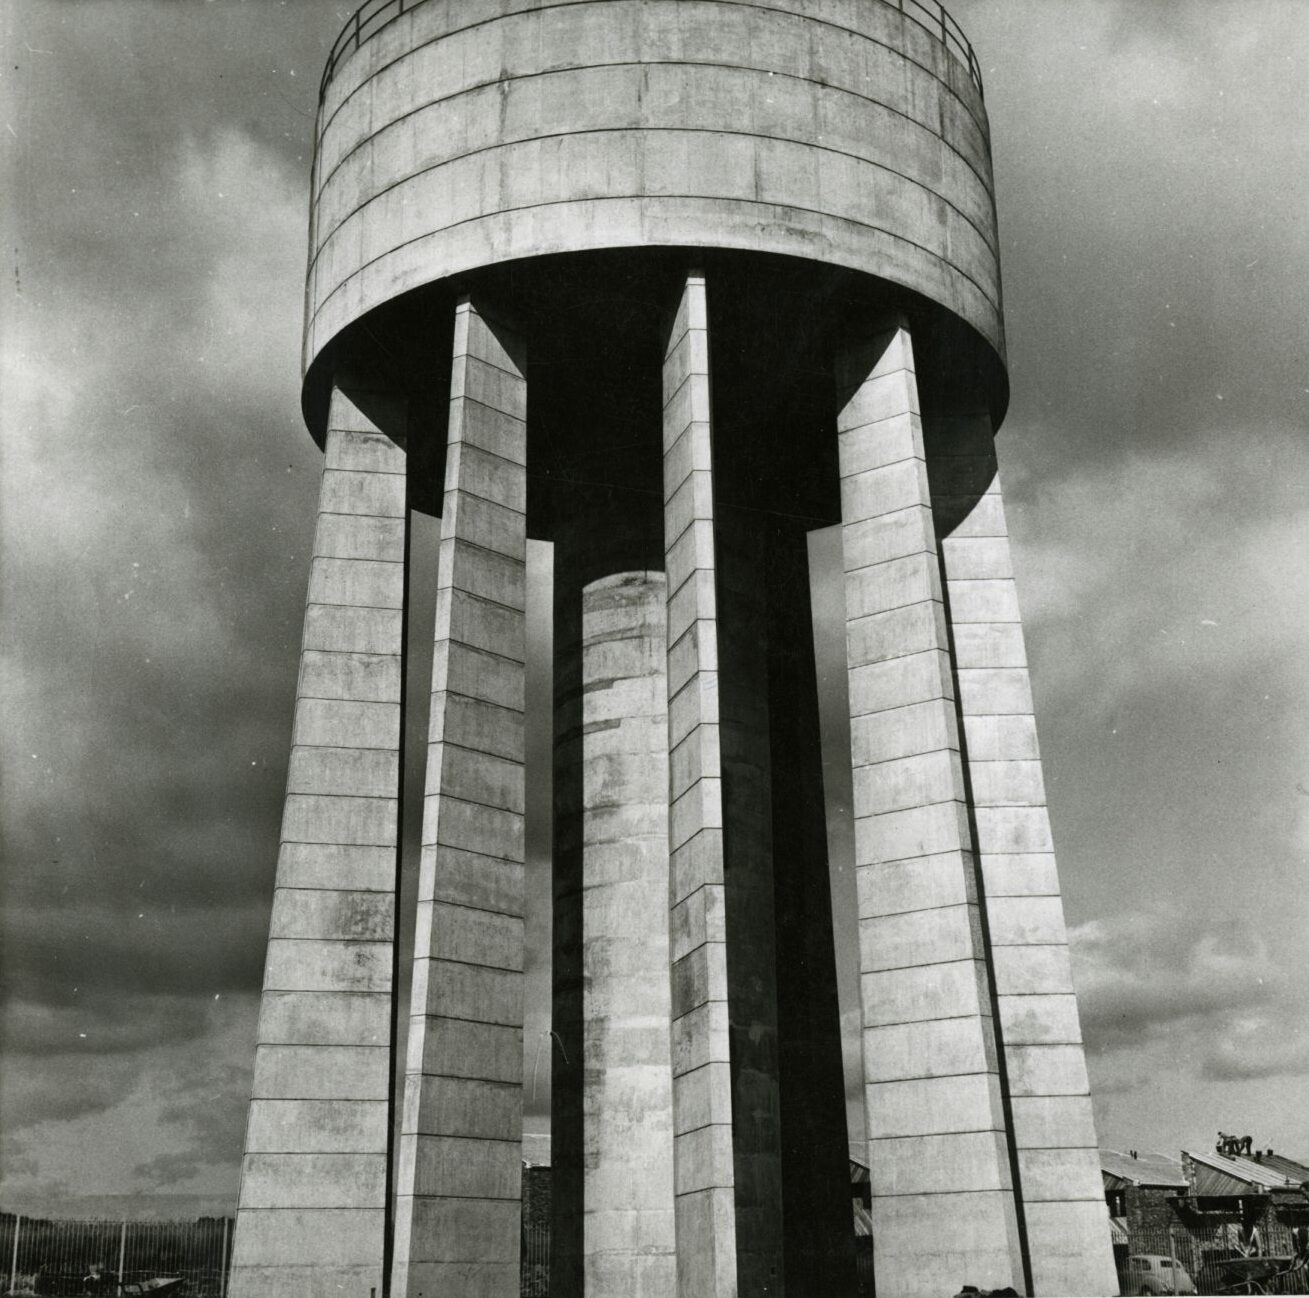 The water tower pictured in August 1963.